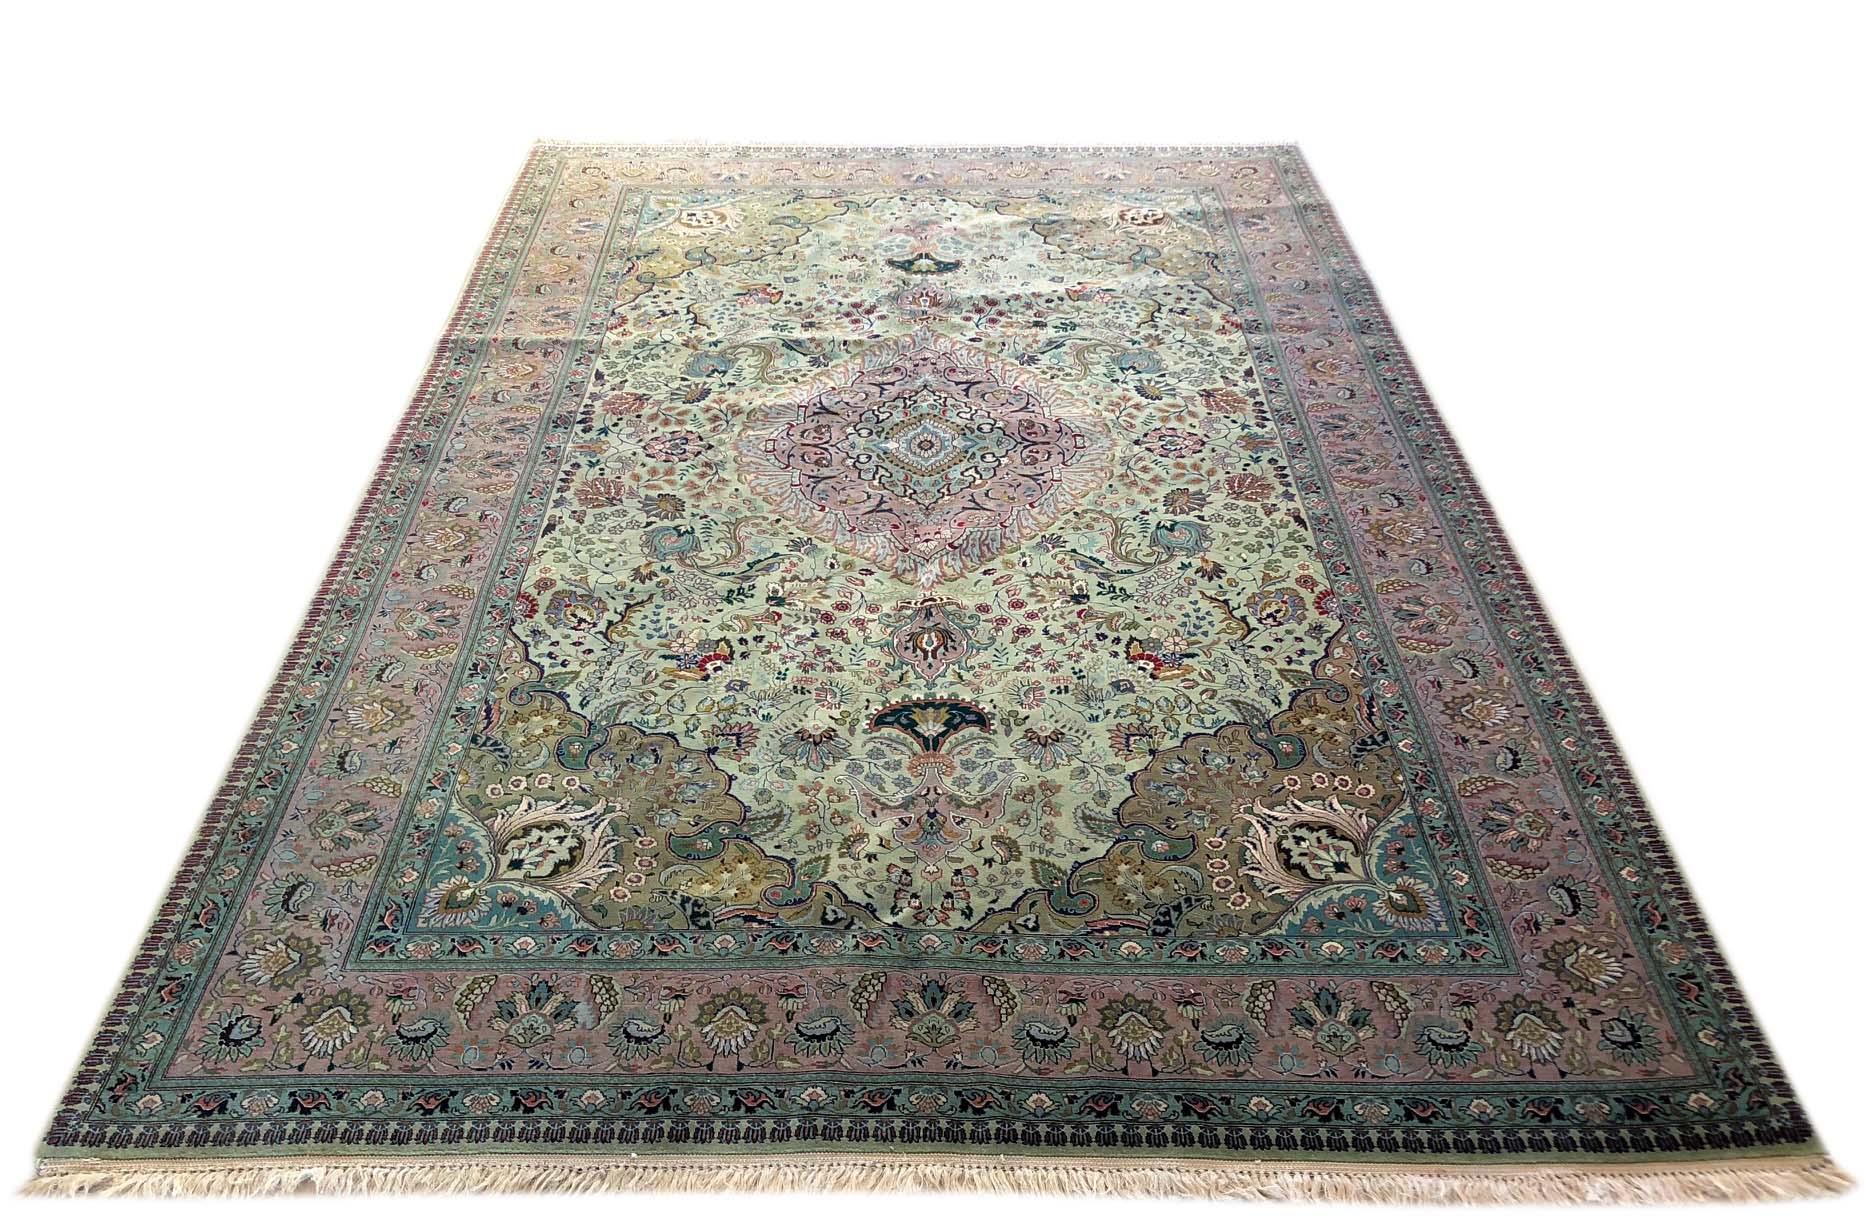 This vintage Persian Tabriz rug has wool pile and cotton foundation with floral pattern. An extremely beautiful color combination including an unusual green color makes this piece a very unique rug for your home. The base color is green and the